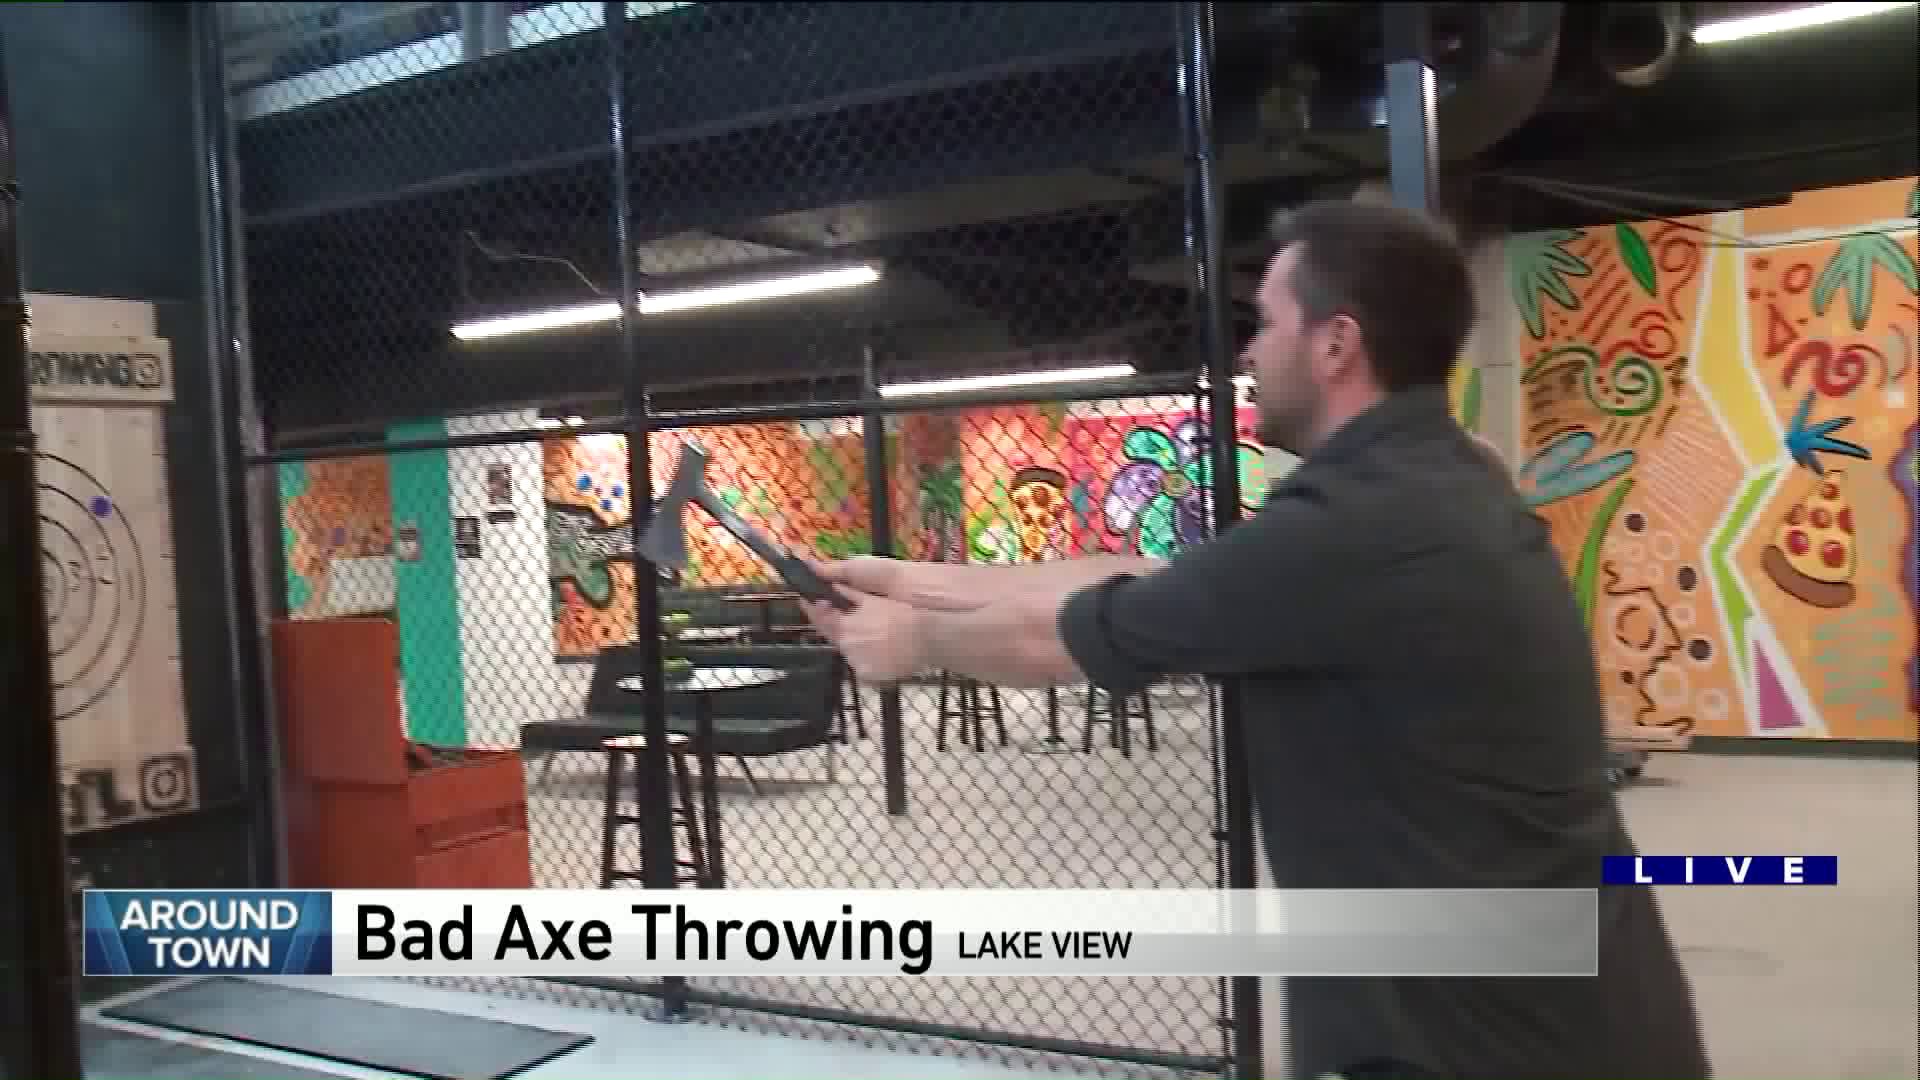 Around Town tries Bad Axe Throwing